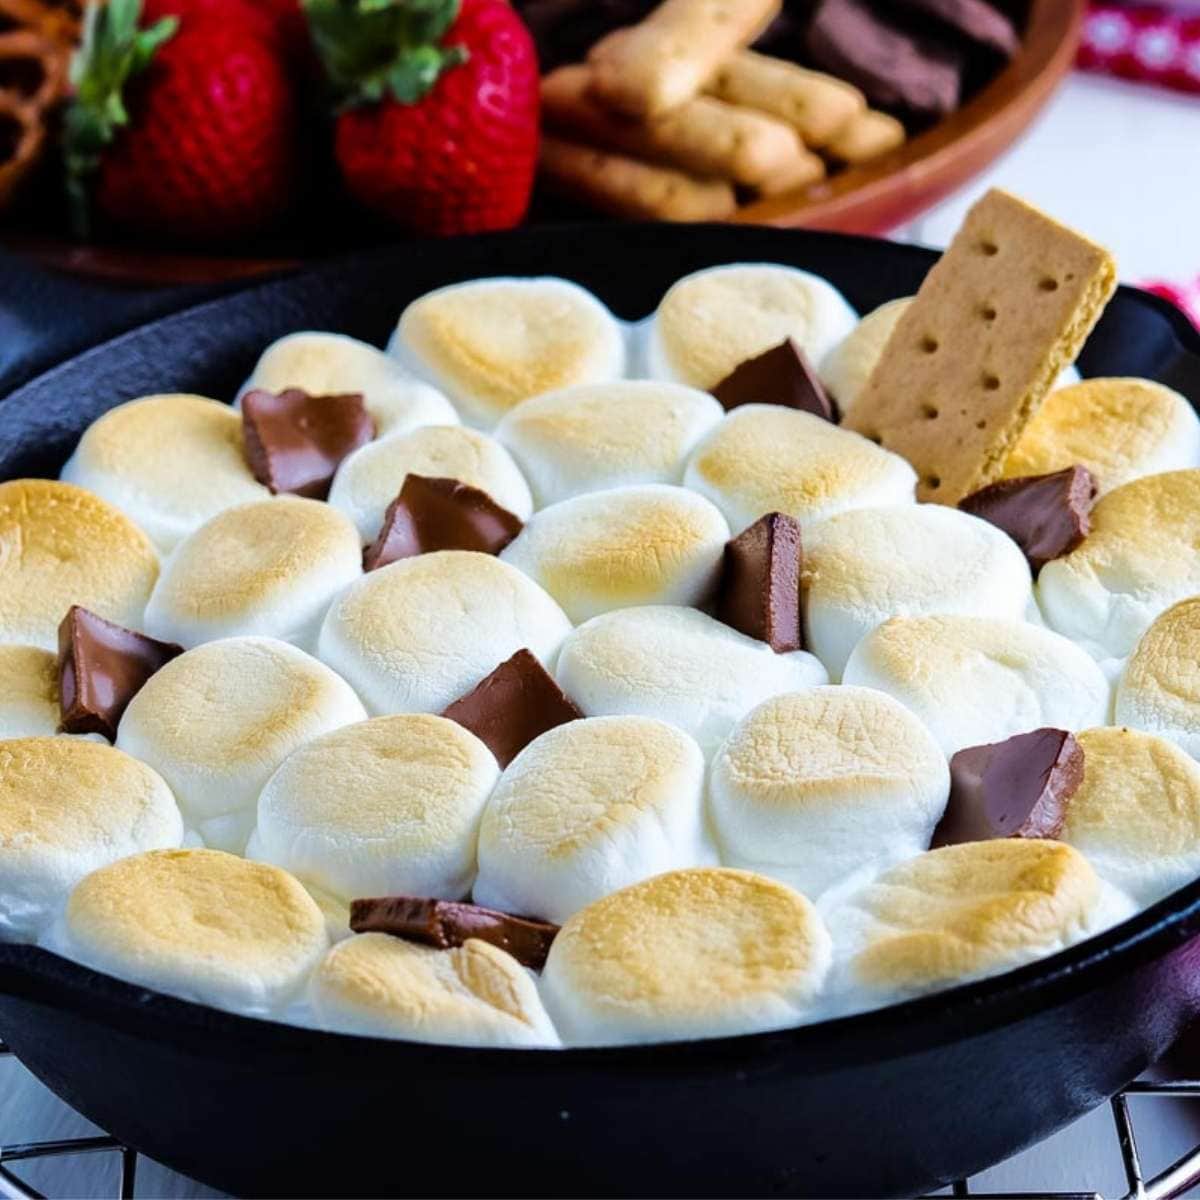 baked skillet smores dip garnished with a graham cracker and chocolate pieces